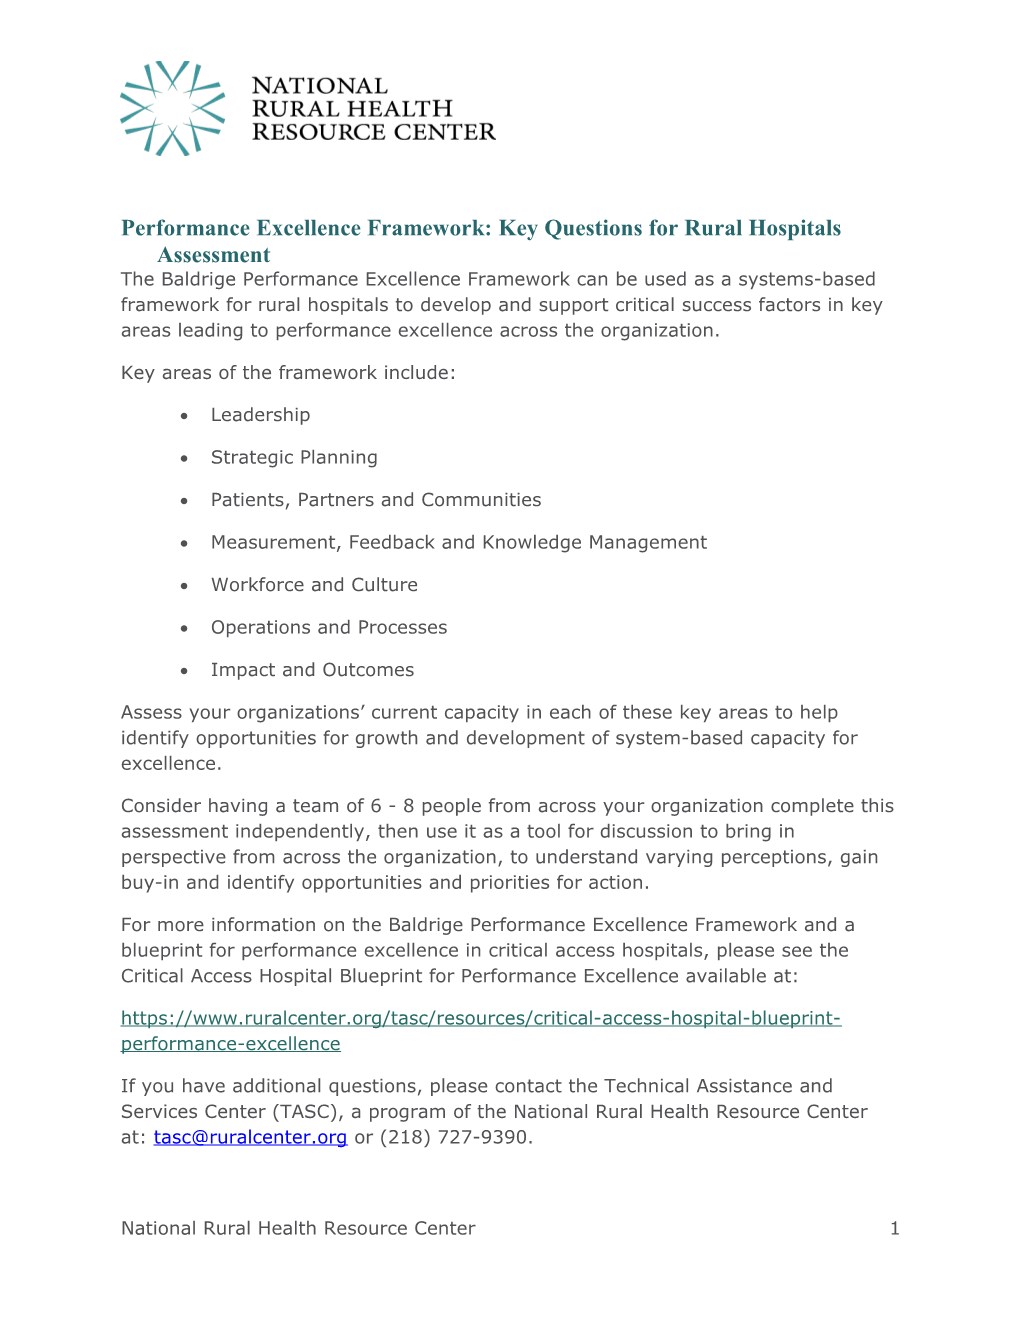 Performance Excellence Framework: Key Questions for Rural Hospitals Assessment